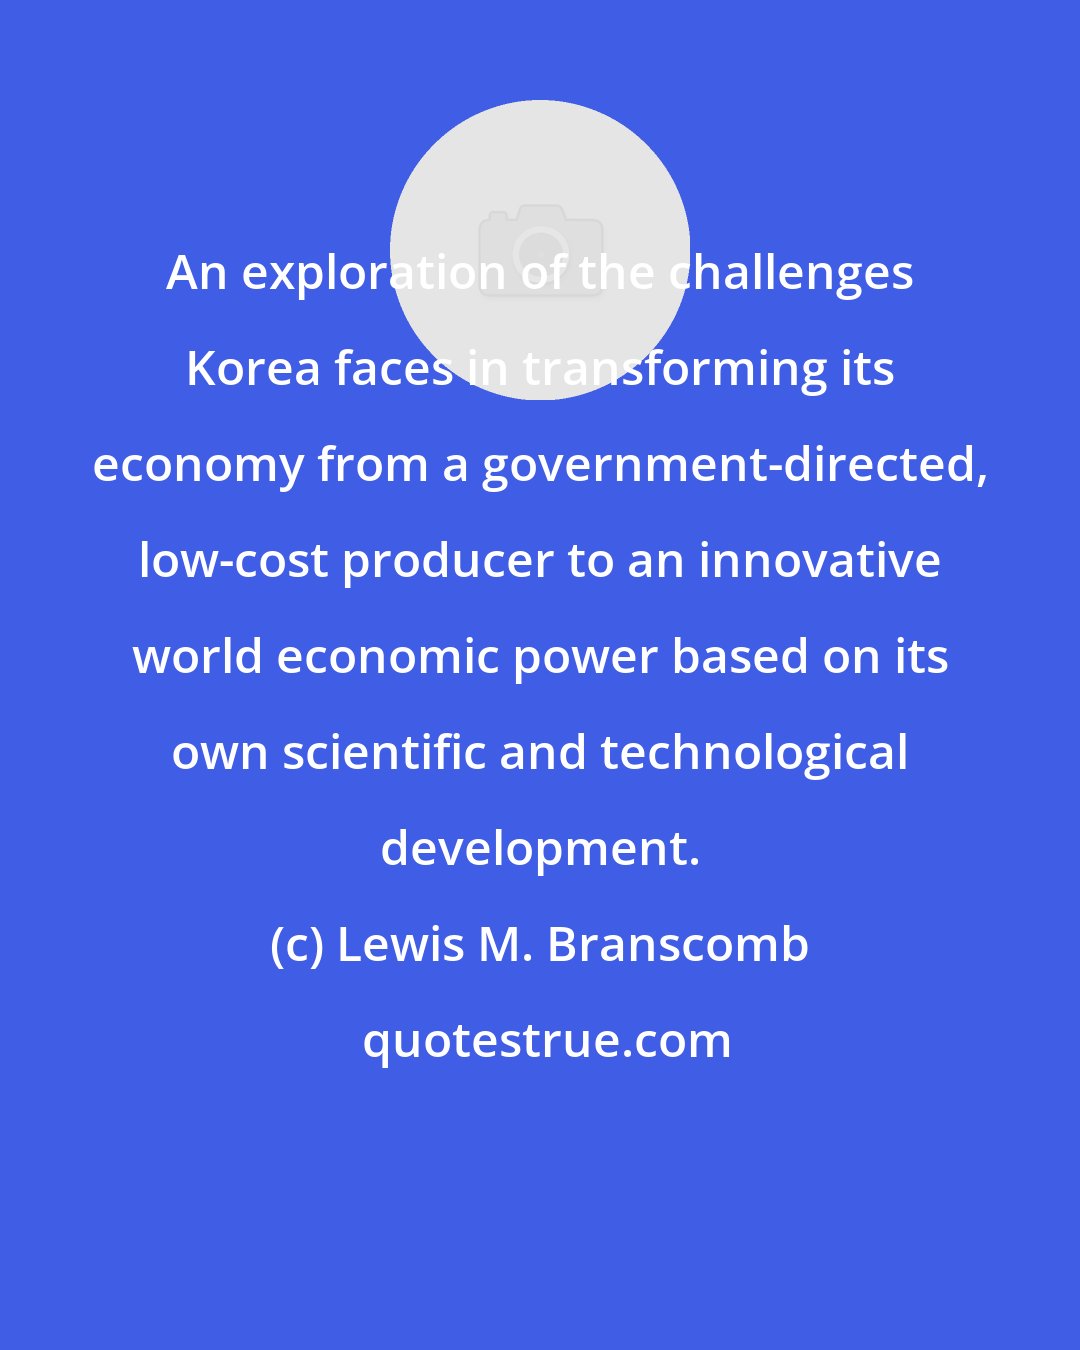 Lewis M. Branscomb: An exploration of the challenges Korea faces in transforming its economy from a government-directed, low-cost producer to an innovative world economic power based on its own scientific and technological development.